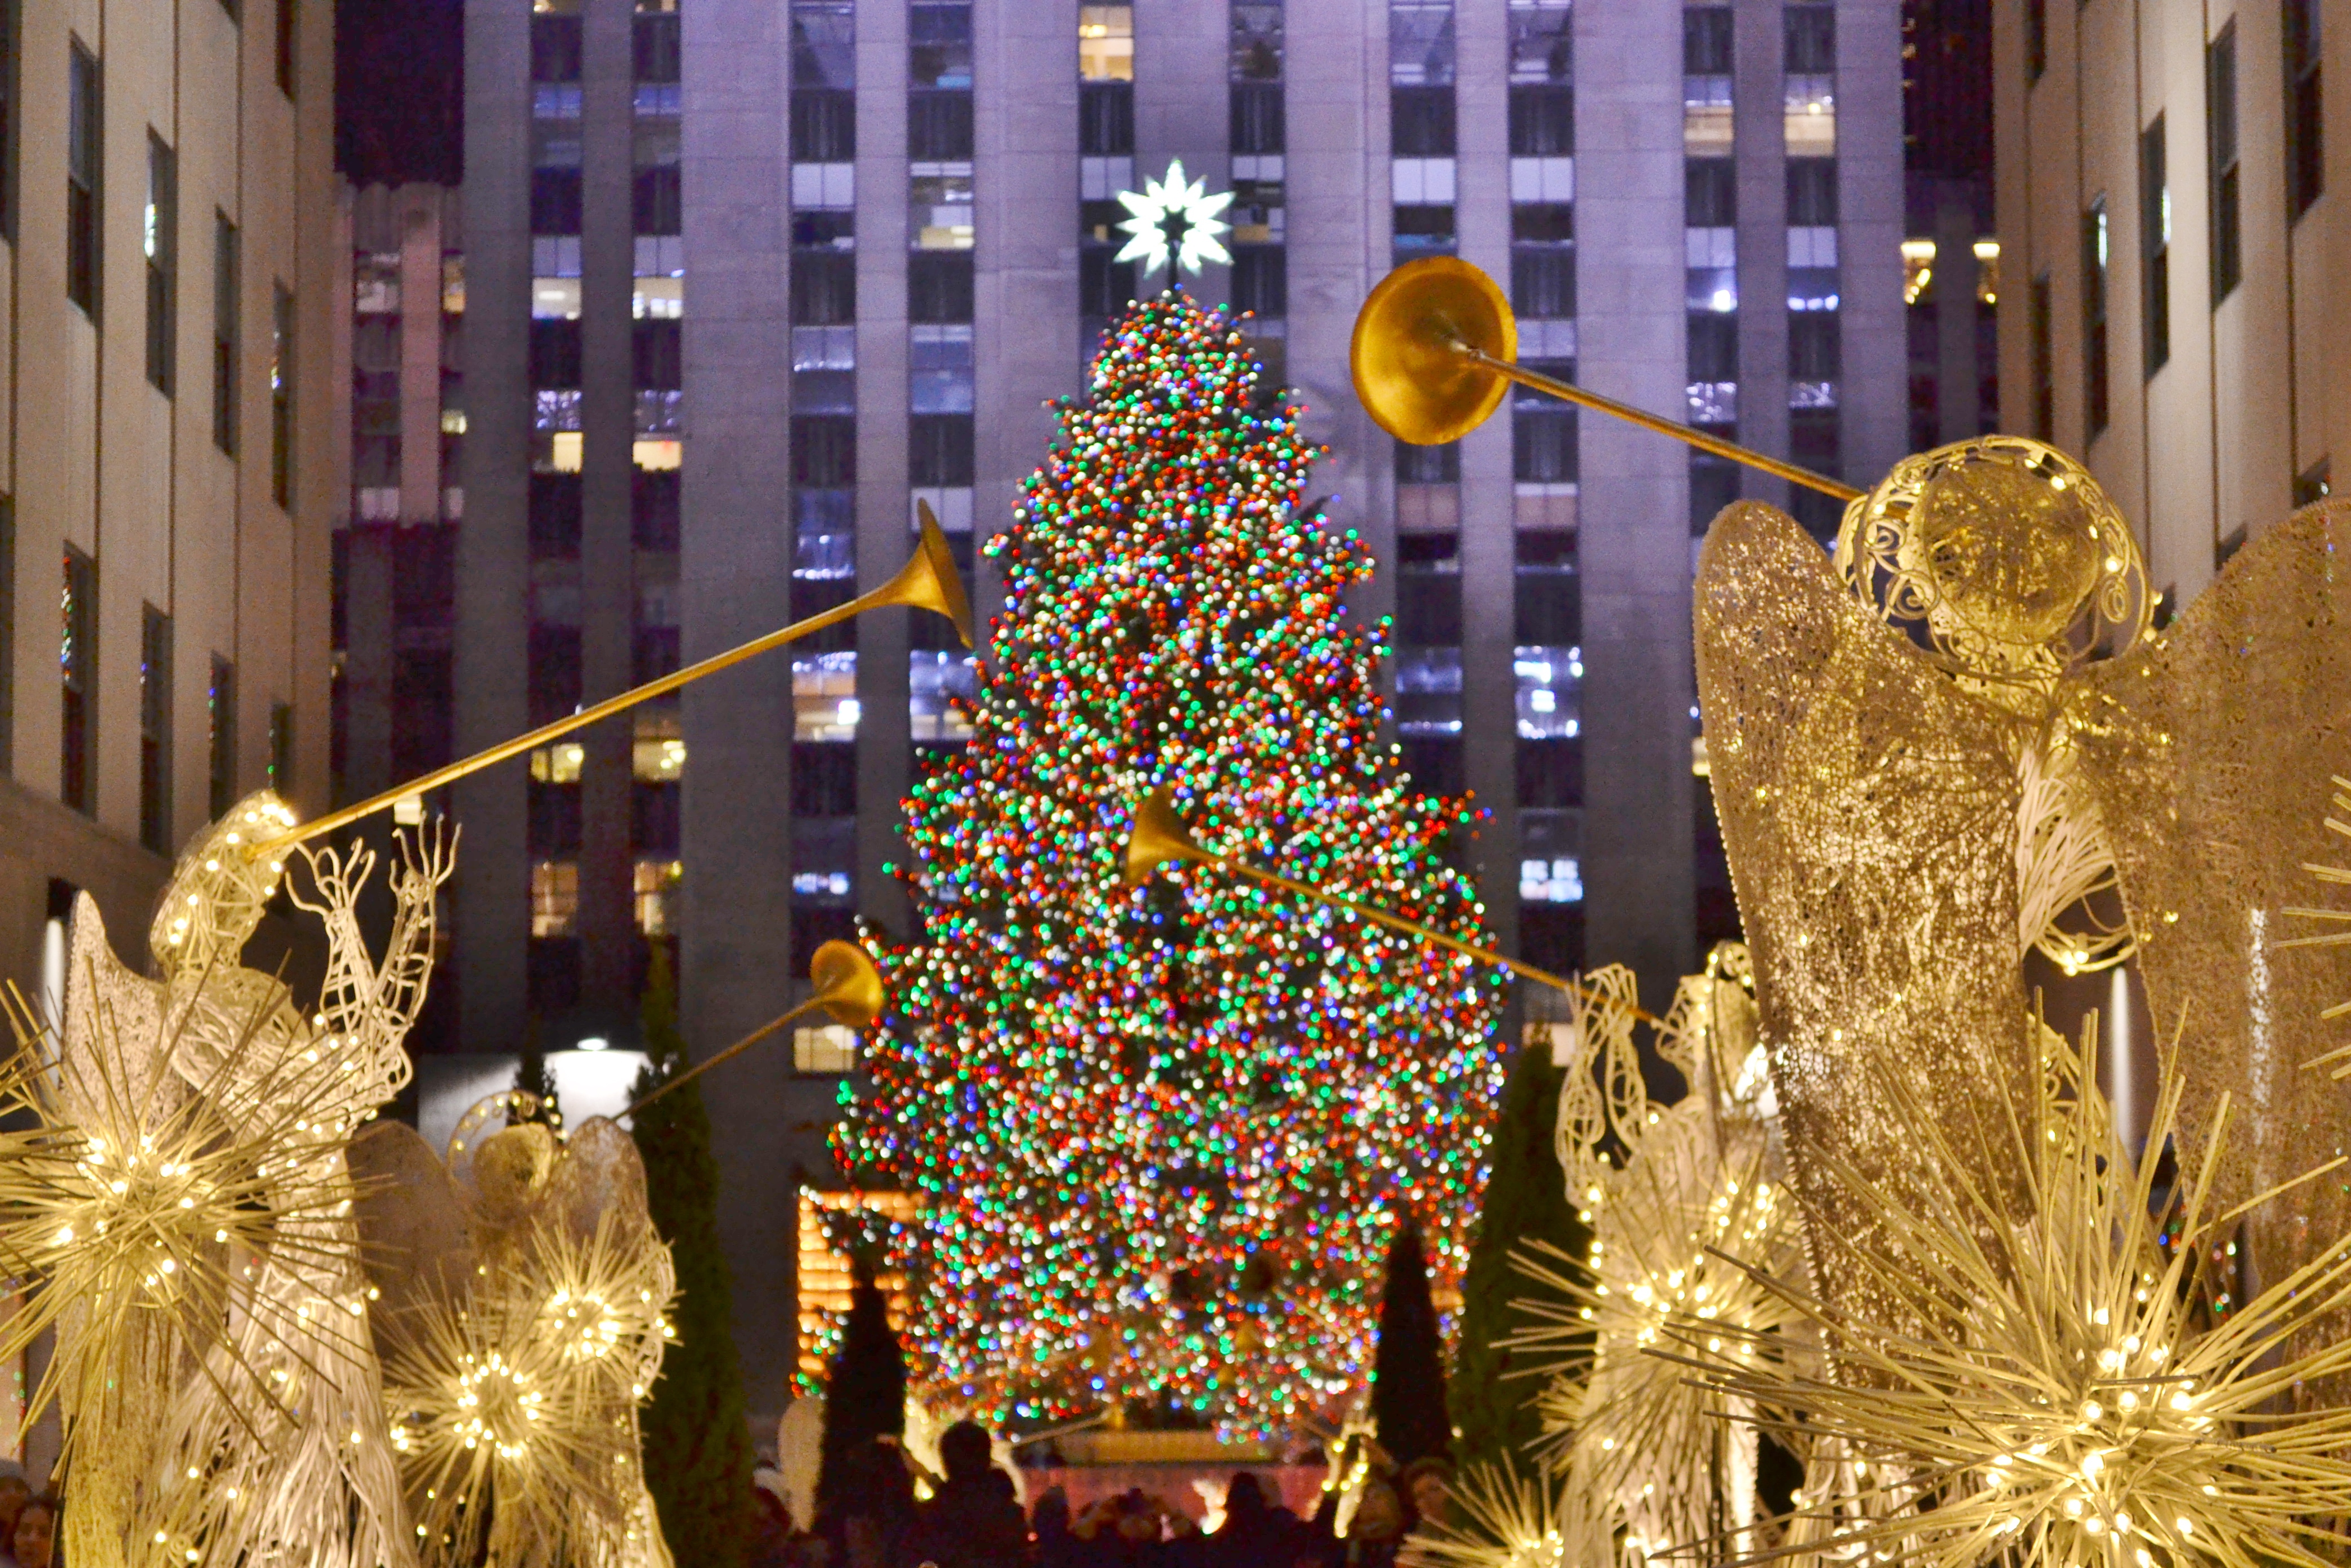 The Rockefeller Center Christmas tree. The tree is decorated with lights. There are illuminated statues of angels with trumpets in front of the tree.